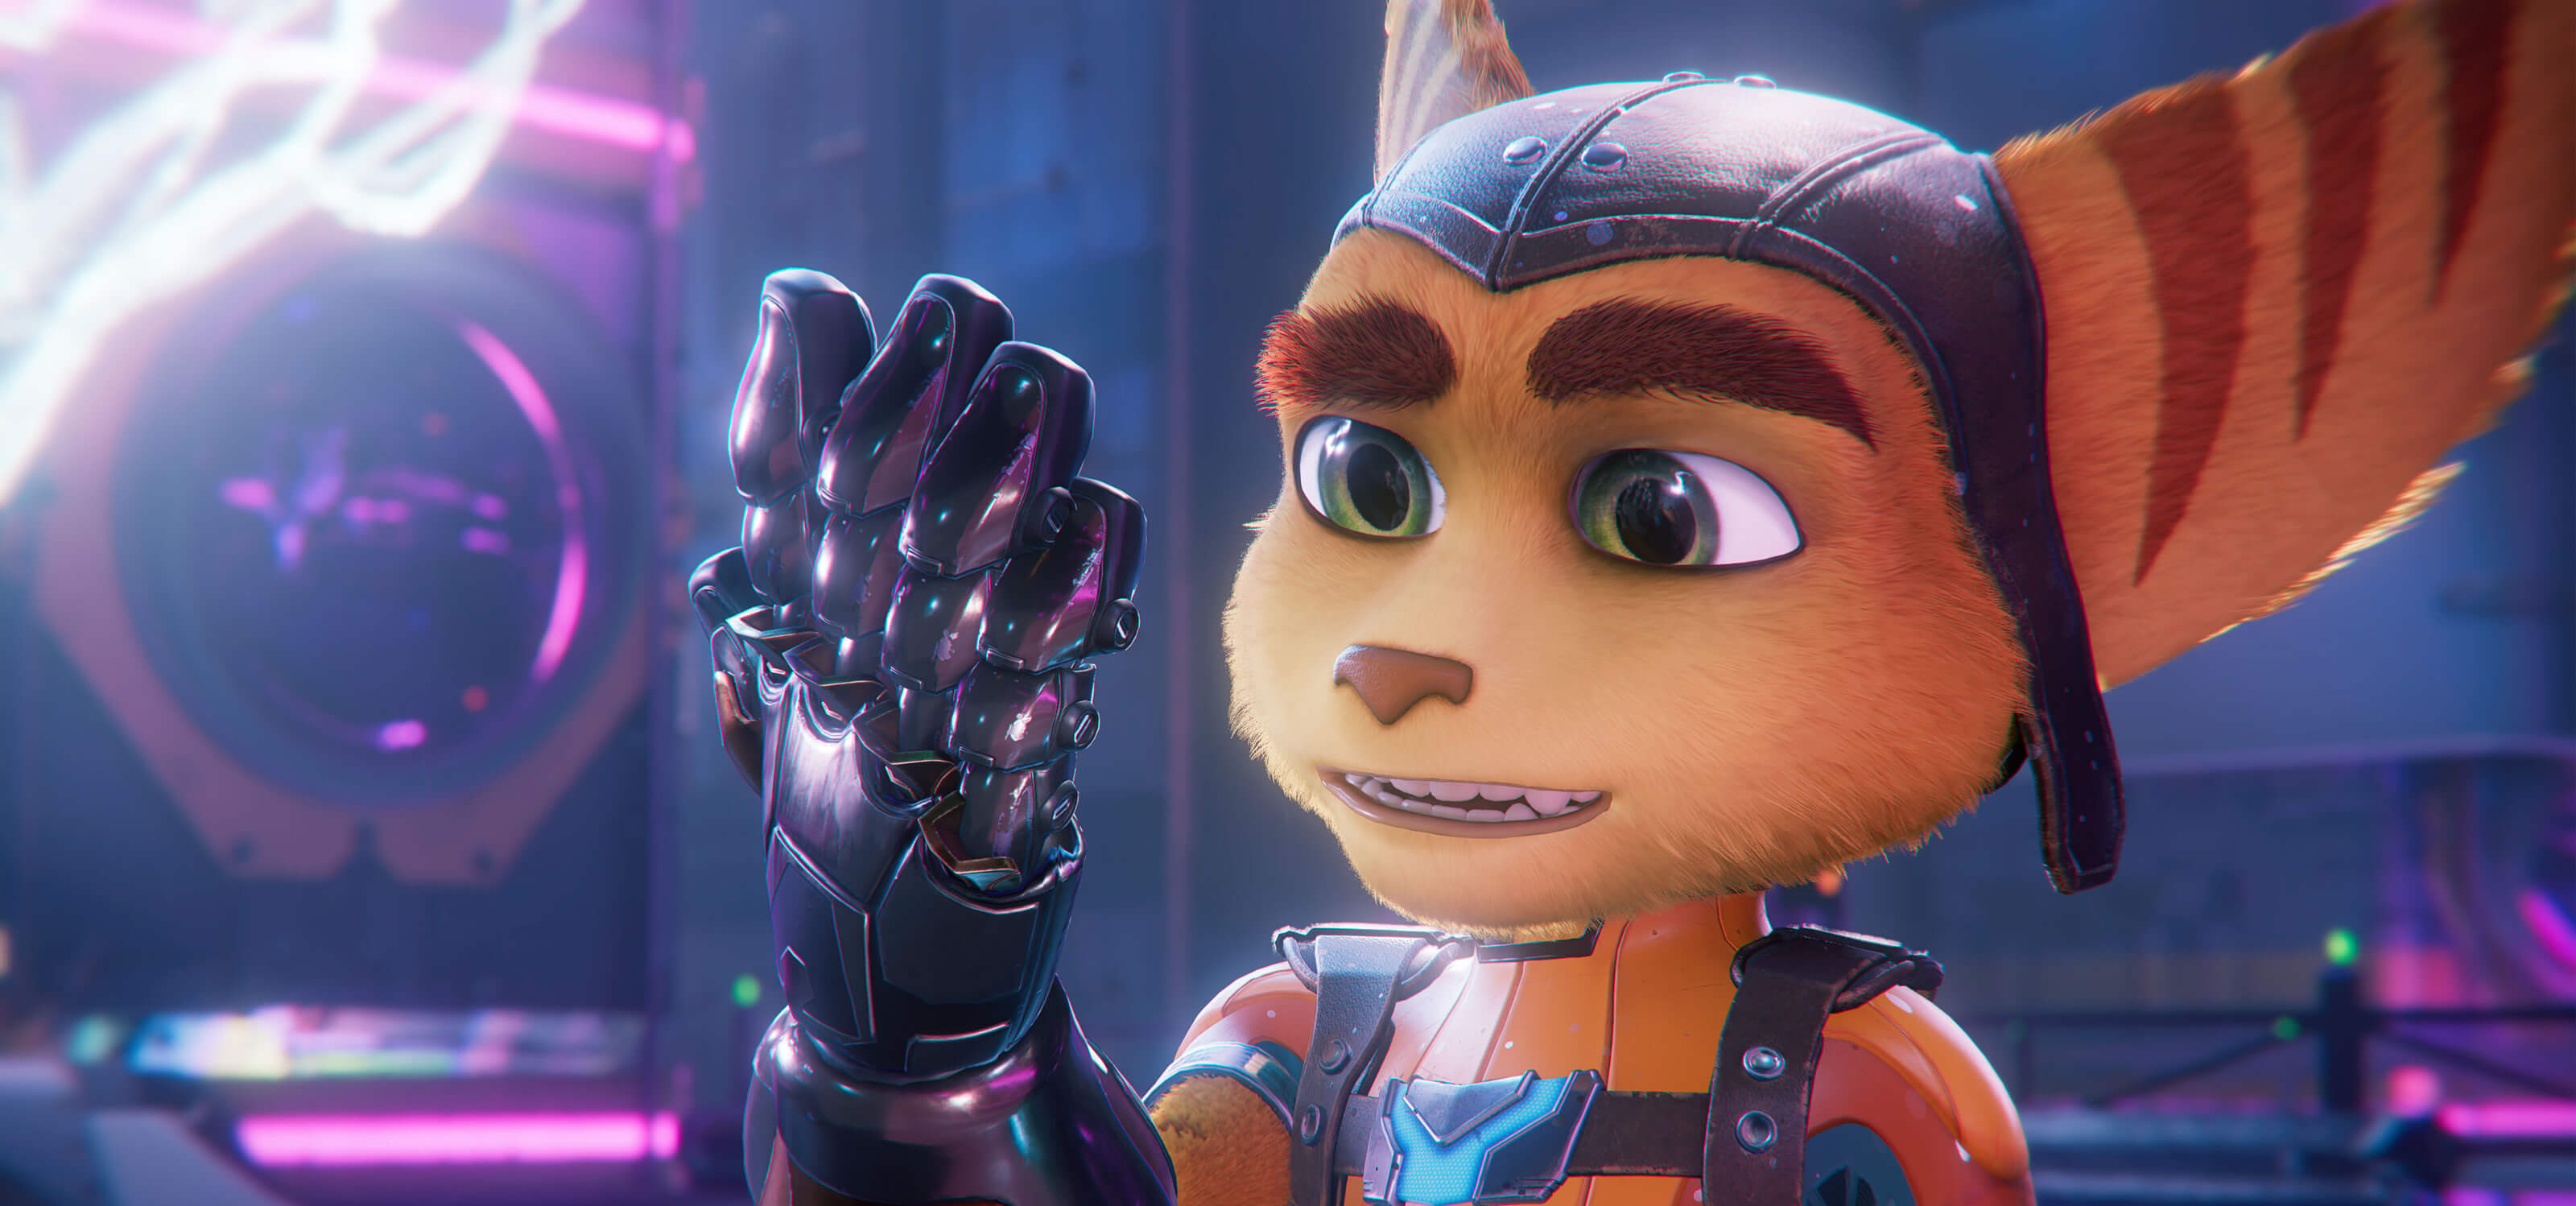 Ratchet admires his mechanical glove in a screenshot from Ratcher & Clank: Rift Apart.